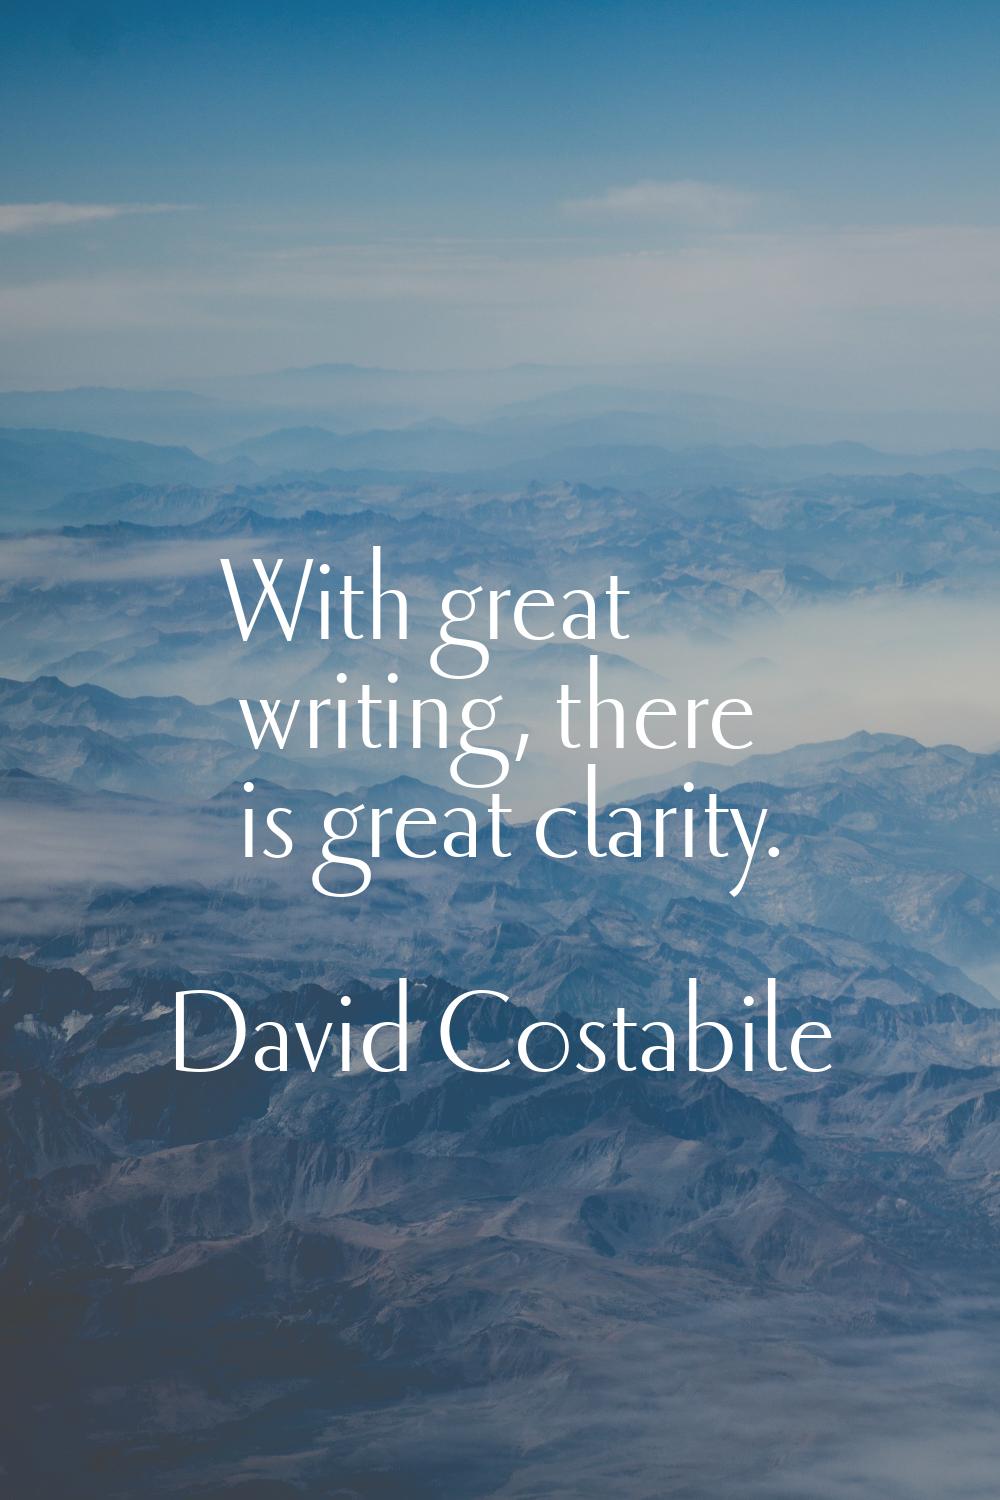 With great writing, there is great clarity.